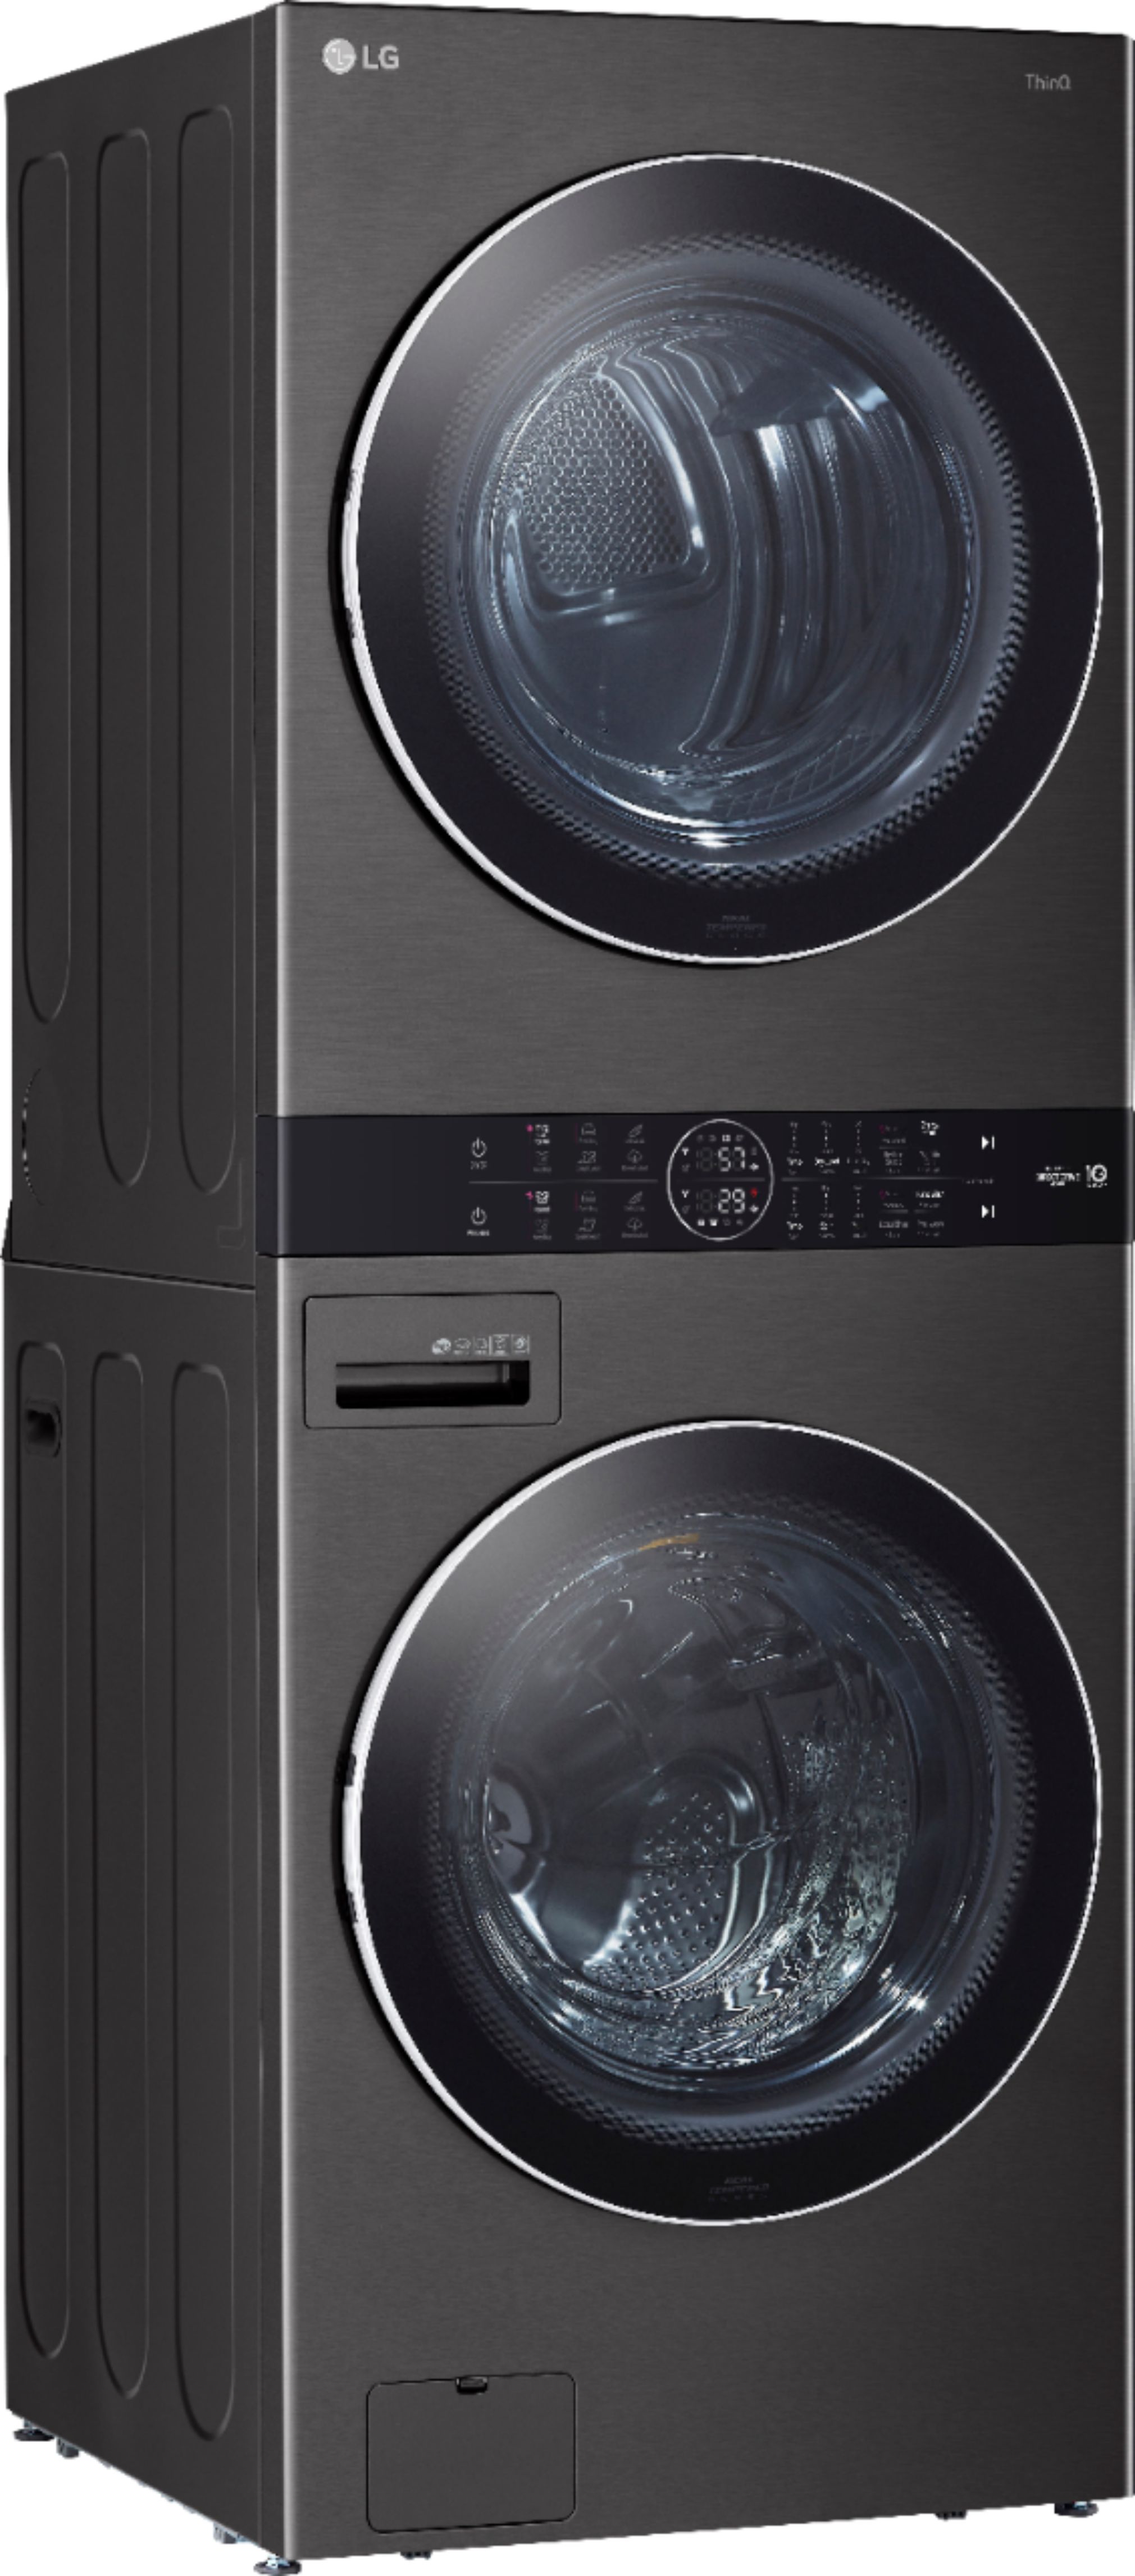 Made in Italy Meliconi The Tower 2-in-1 Washing Machine and Tumble Dryer Tower Set Includes 2 Products 1 x Tower Style L60 and 1 x Wash Pro Base White 